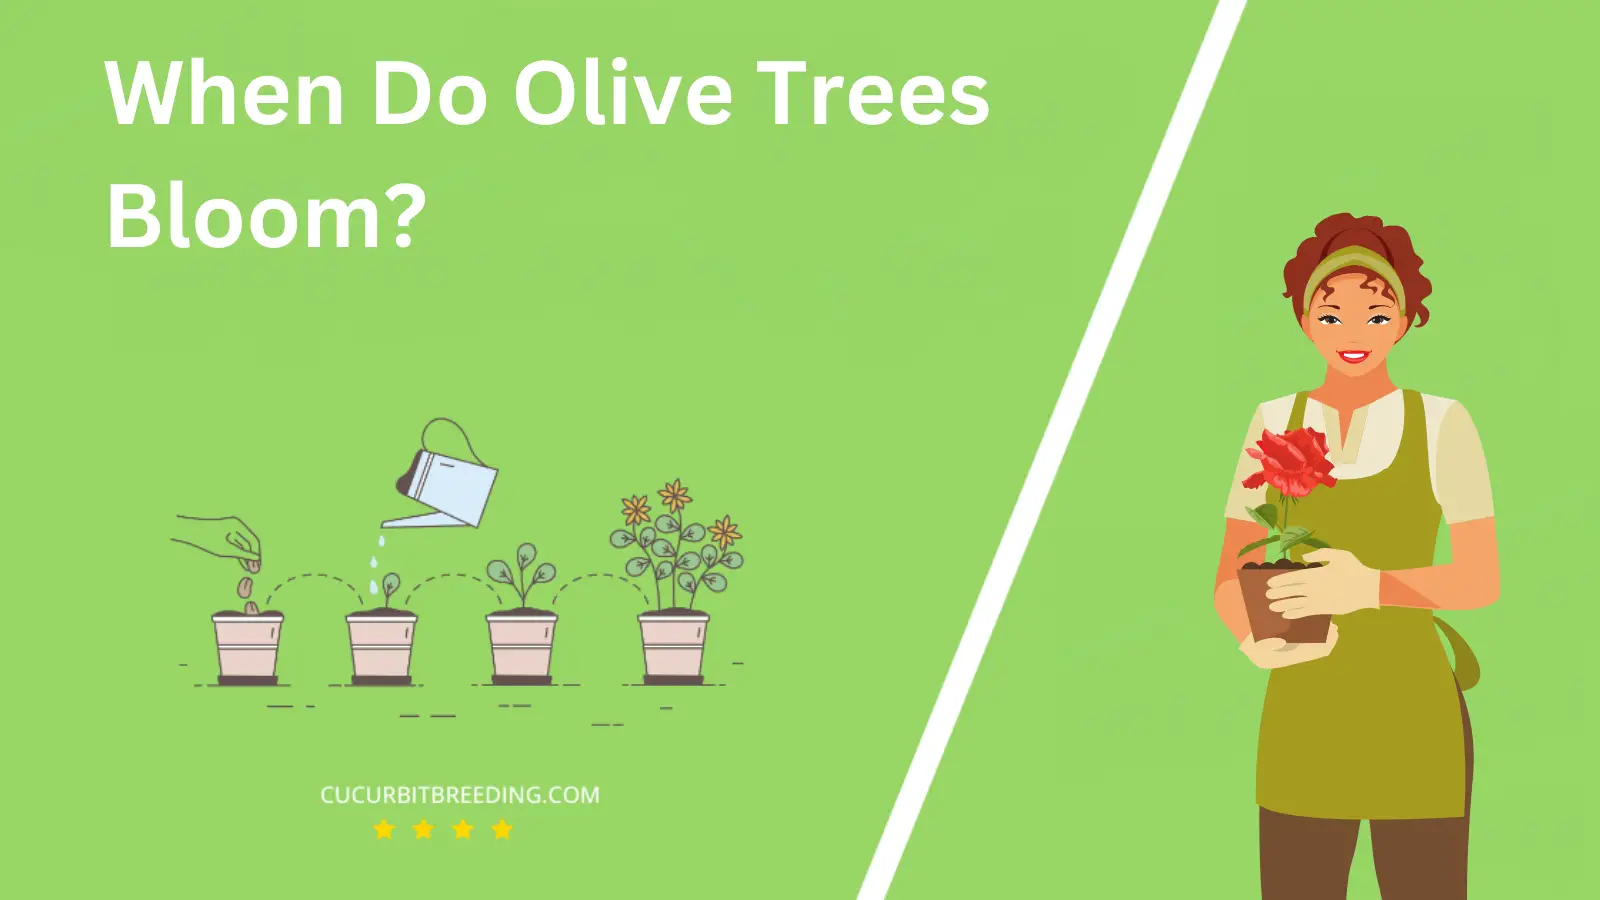 When Do Olive Trees Bloom?